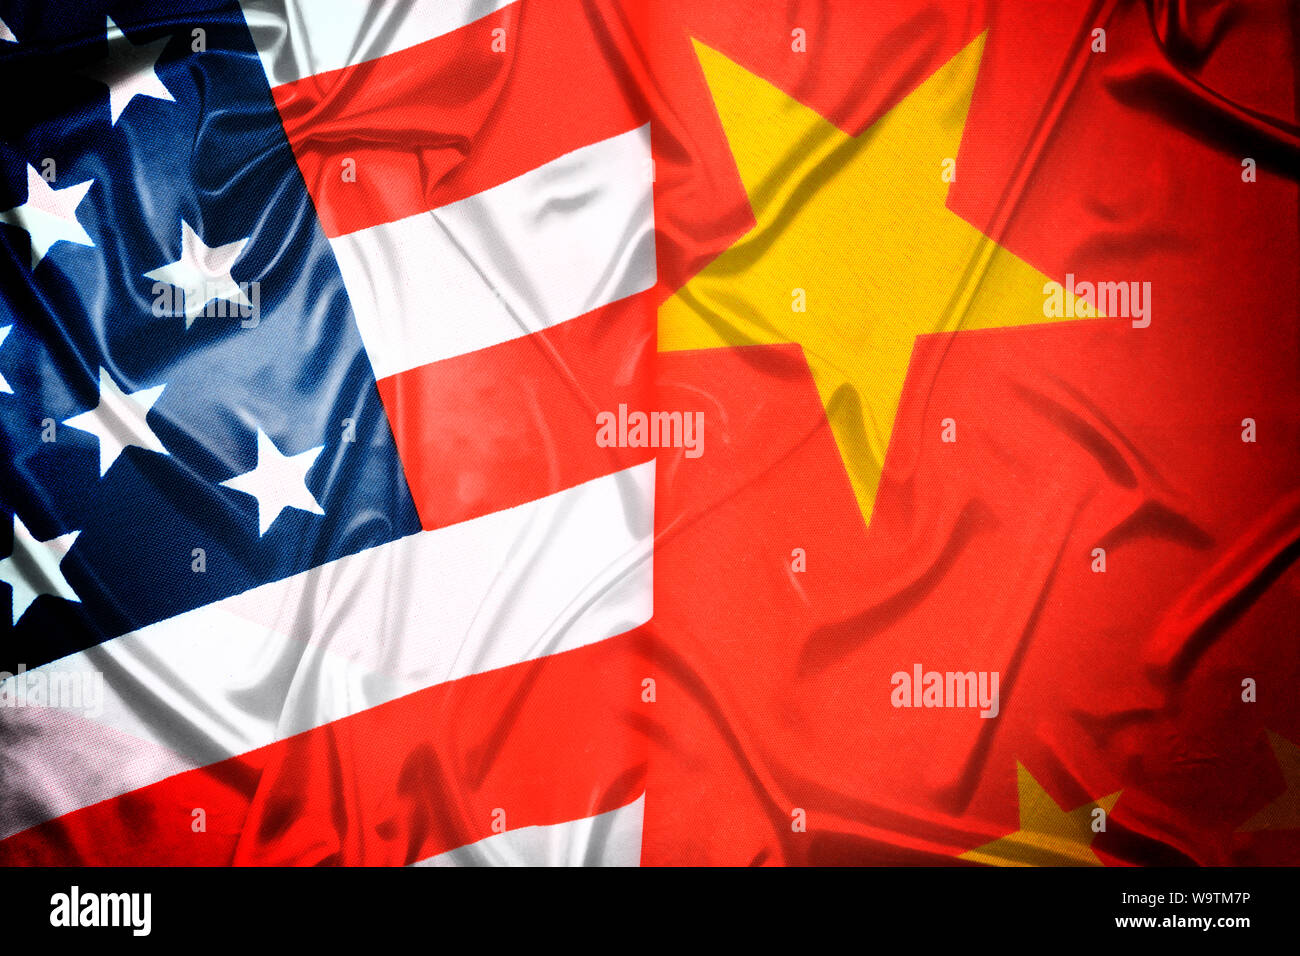 Flags of the USA and China Stock Photo